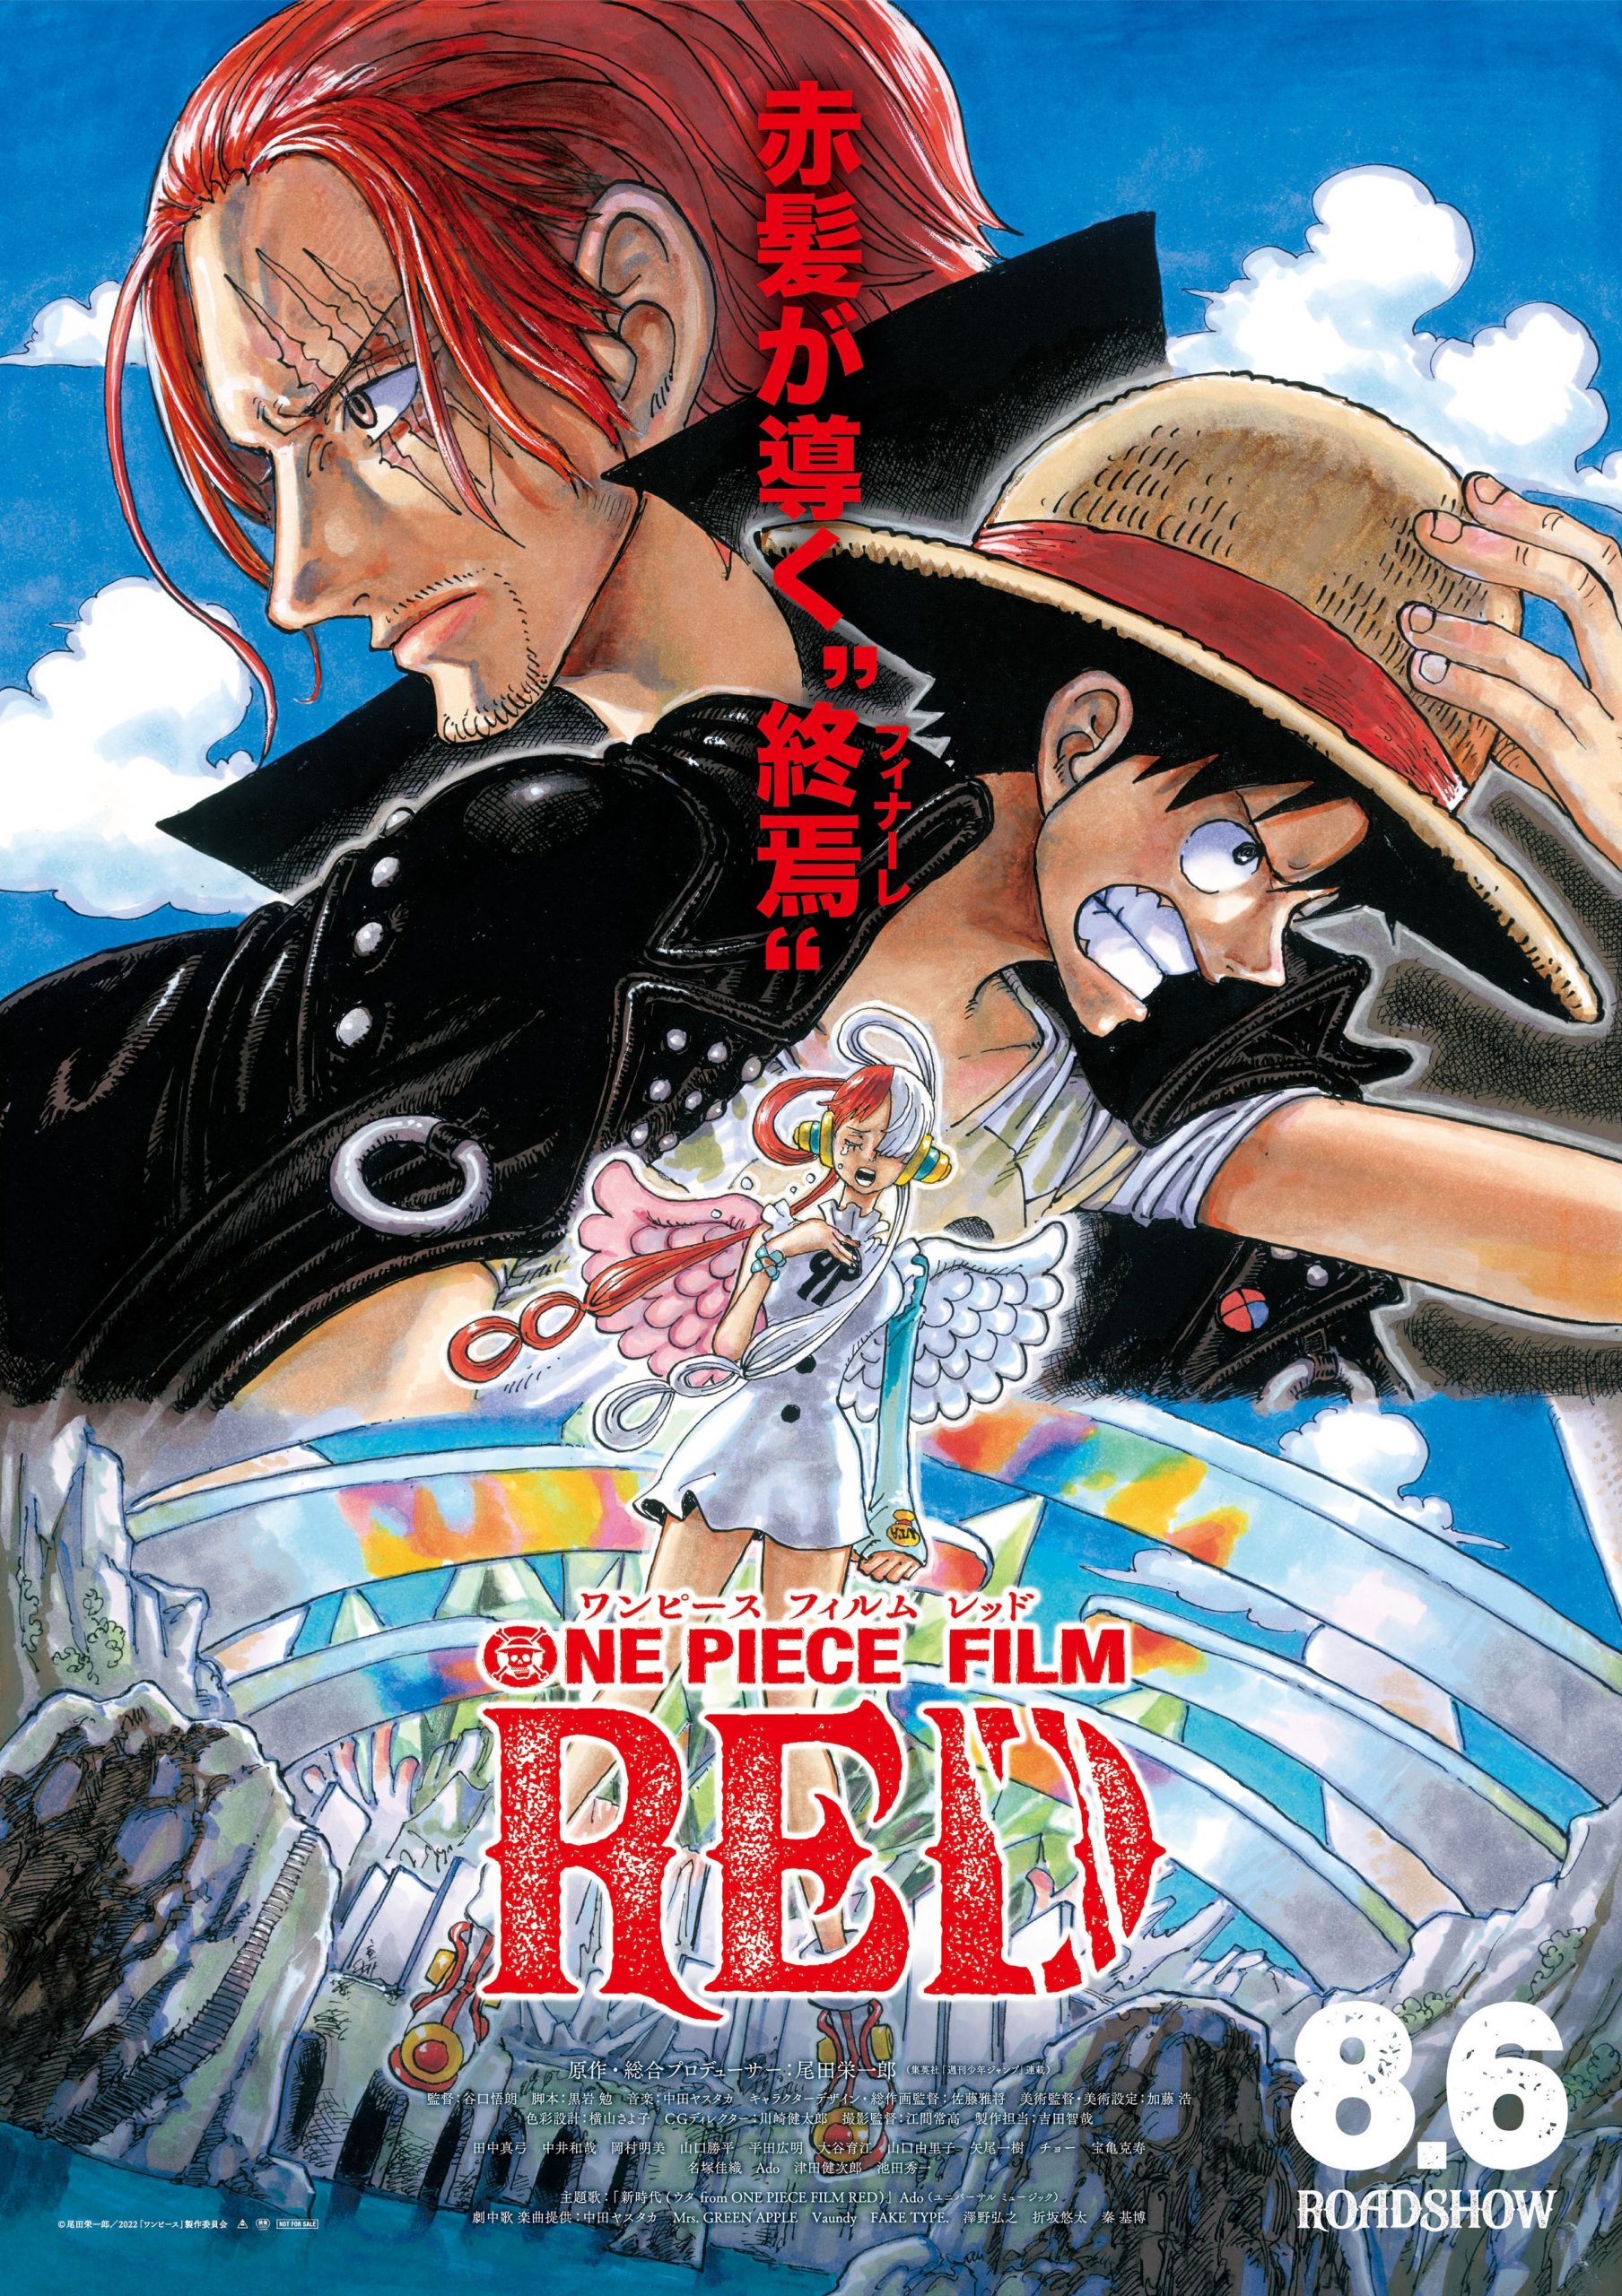 Movie poster for One Piece Film Red with Shanks, Luffy, and Uta.